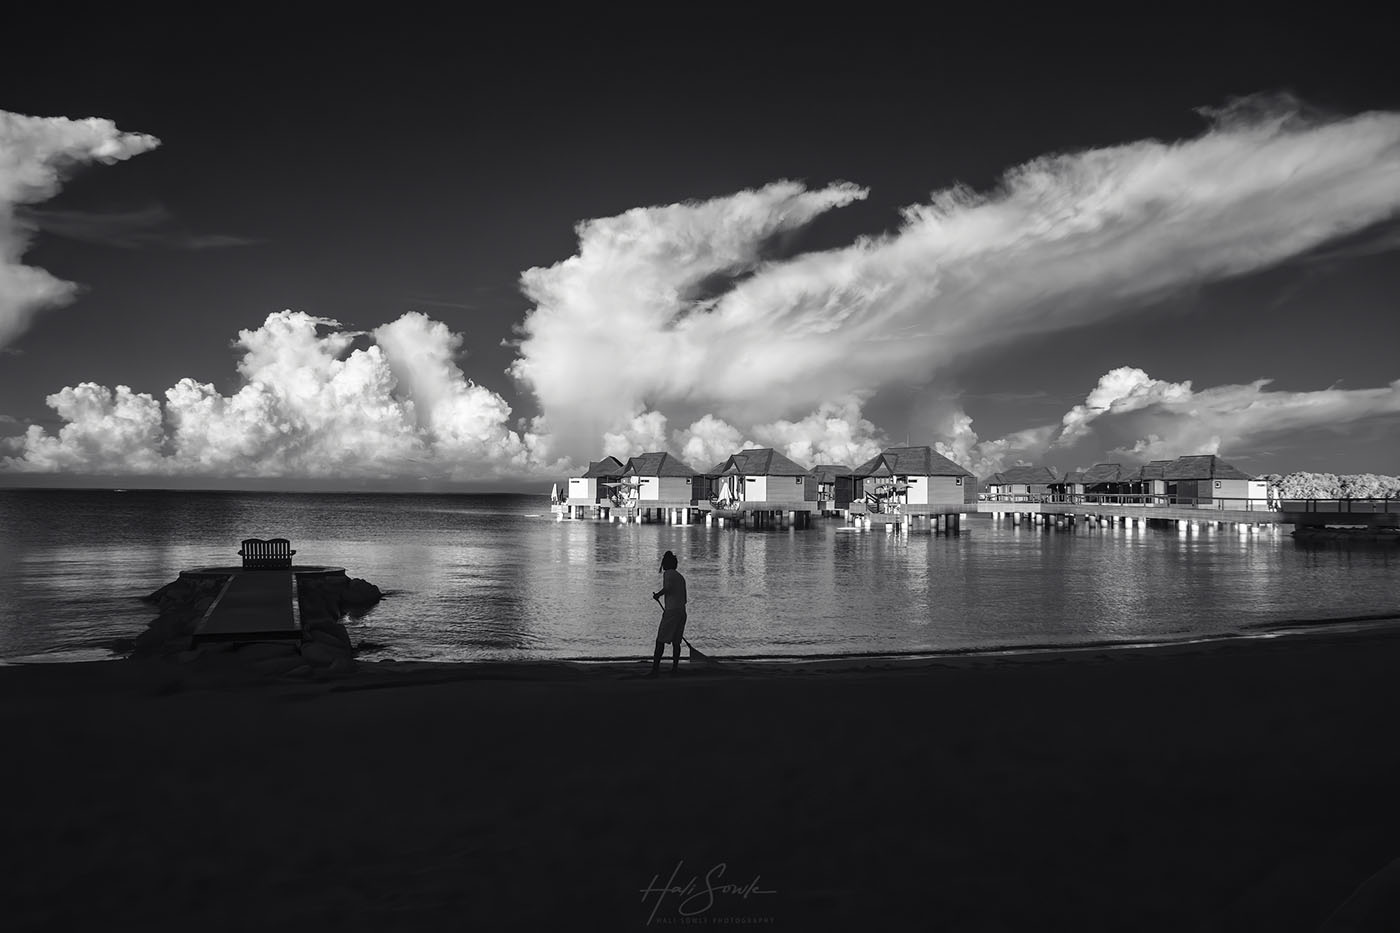 2019_09_Sandals-SouthCoast-10501-Edit1000.jpg - Another morning shot in infrared.  The watersports guys were also charged with raking the beach every morning and they did a great job of removing the sticks and leaves and other debris that accumulated during the day.  The light and clouds were stunning this morning, about 15 minutes after the sun had come up over the mountains.